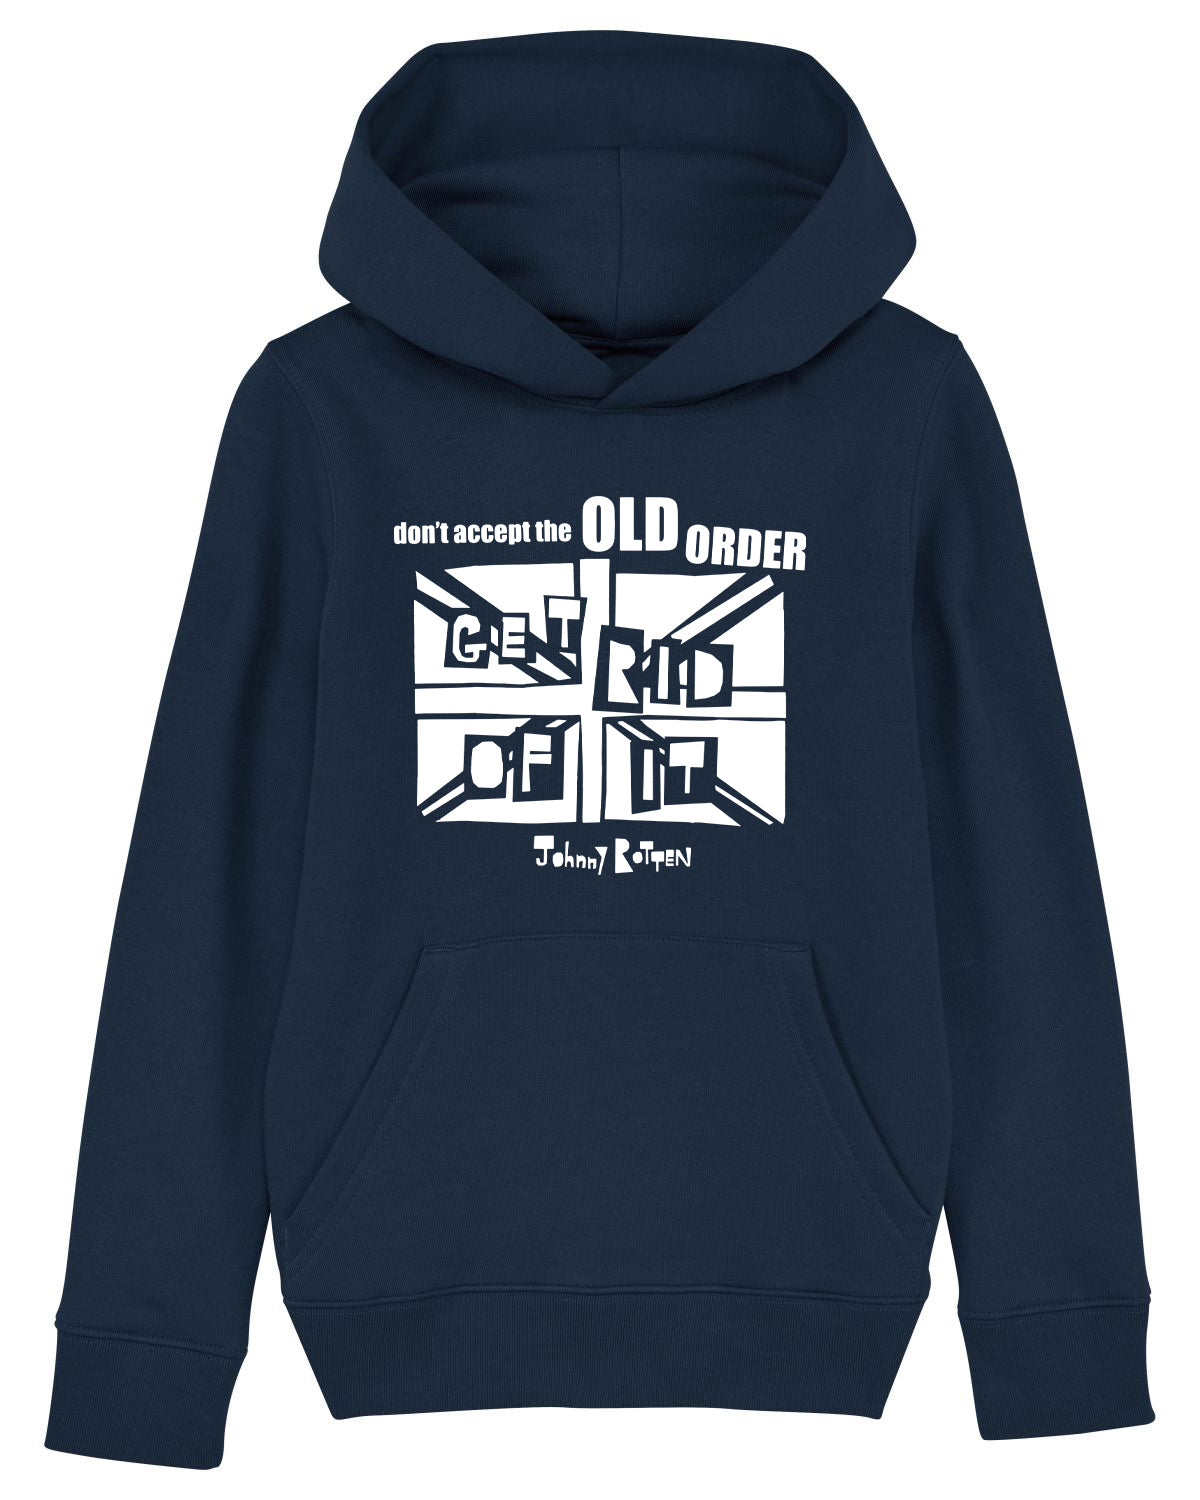 'Don't Accept The Old Order, Get Rid Of It' Organic Kids Hoodie